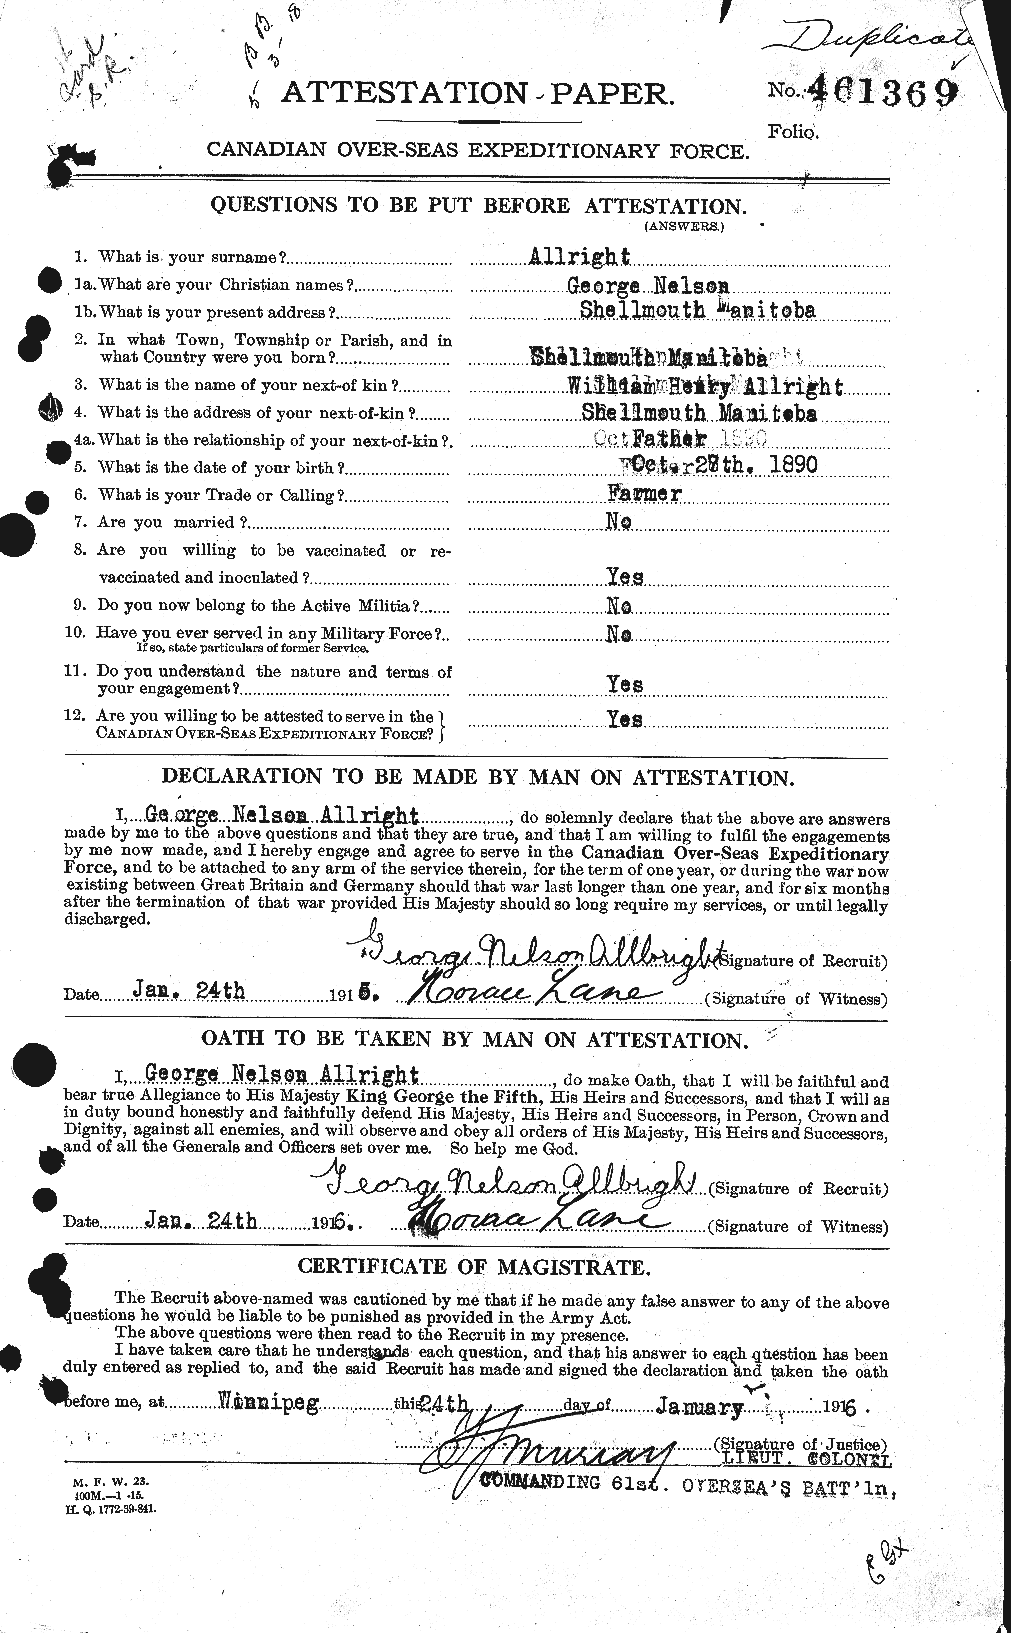 Personnel Records of the First World War - CEF 205673a